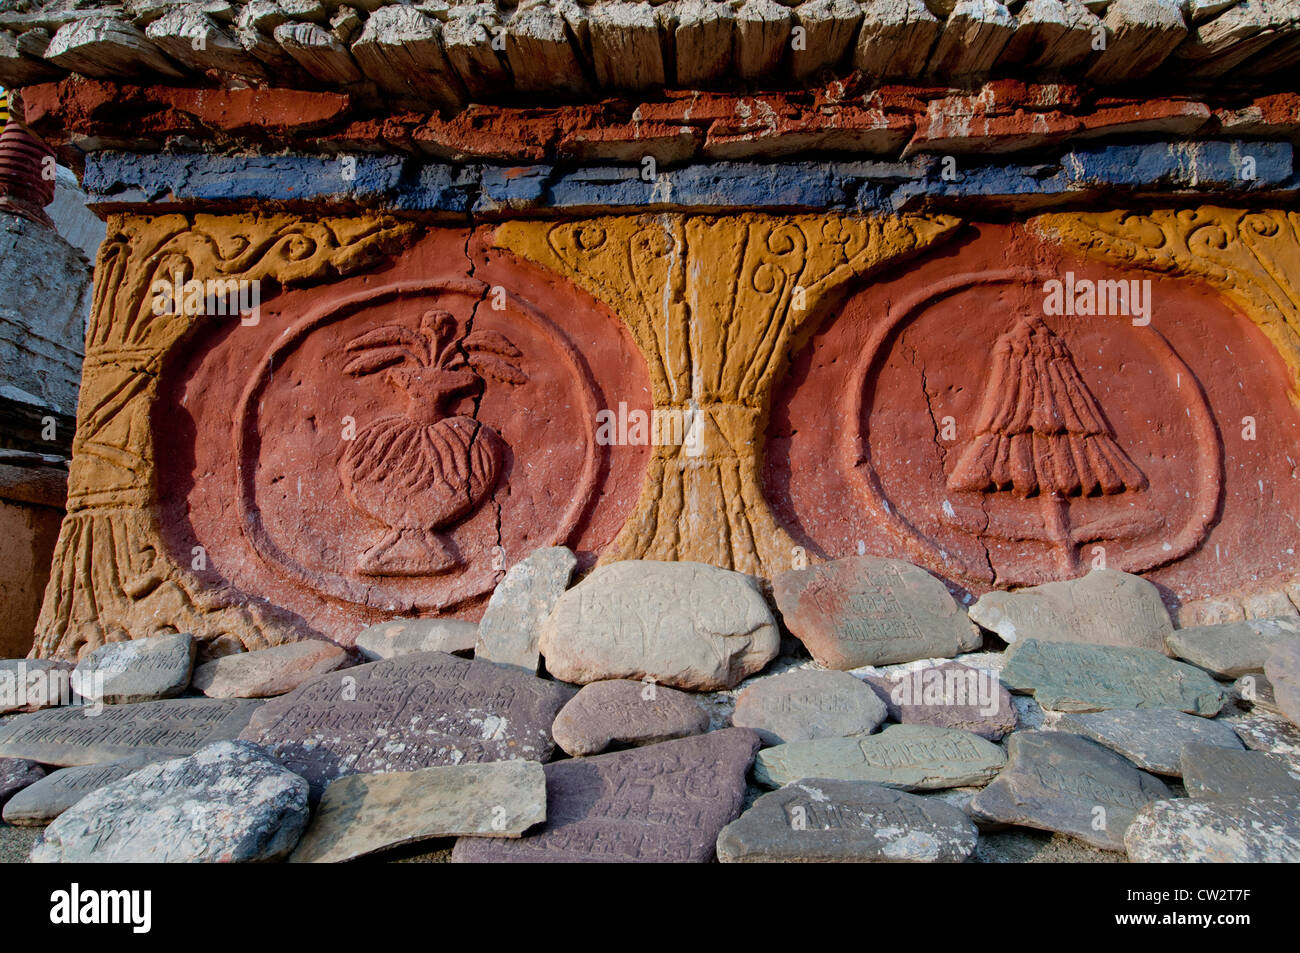 Closeup of the carved bas relief decoration on a chorten at Lamayuru Monastery with carved prayer stones in Ladakh, India Stock Photo